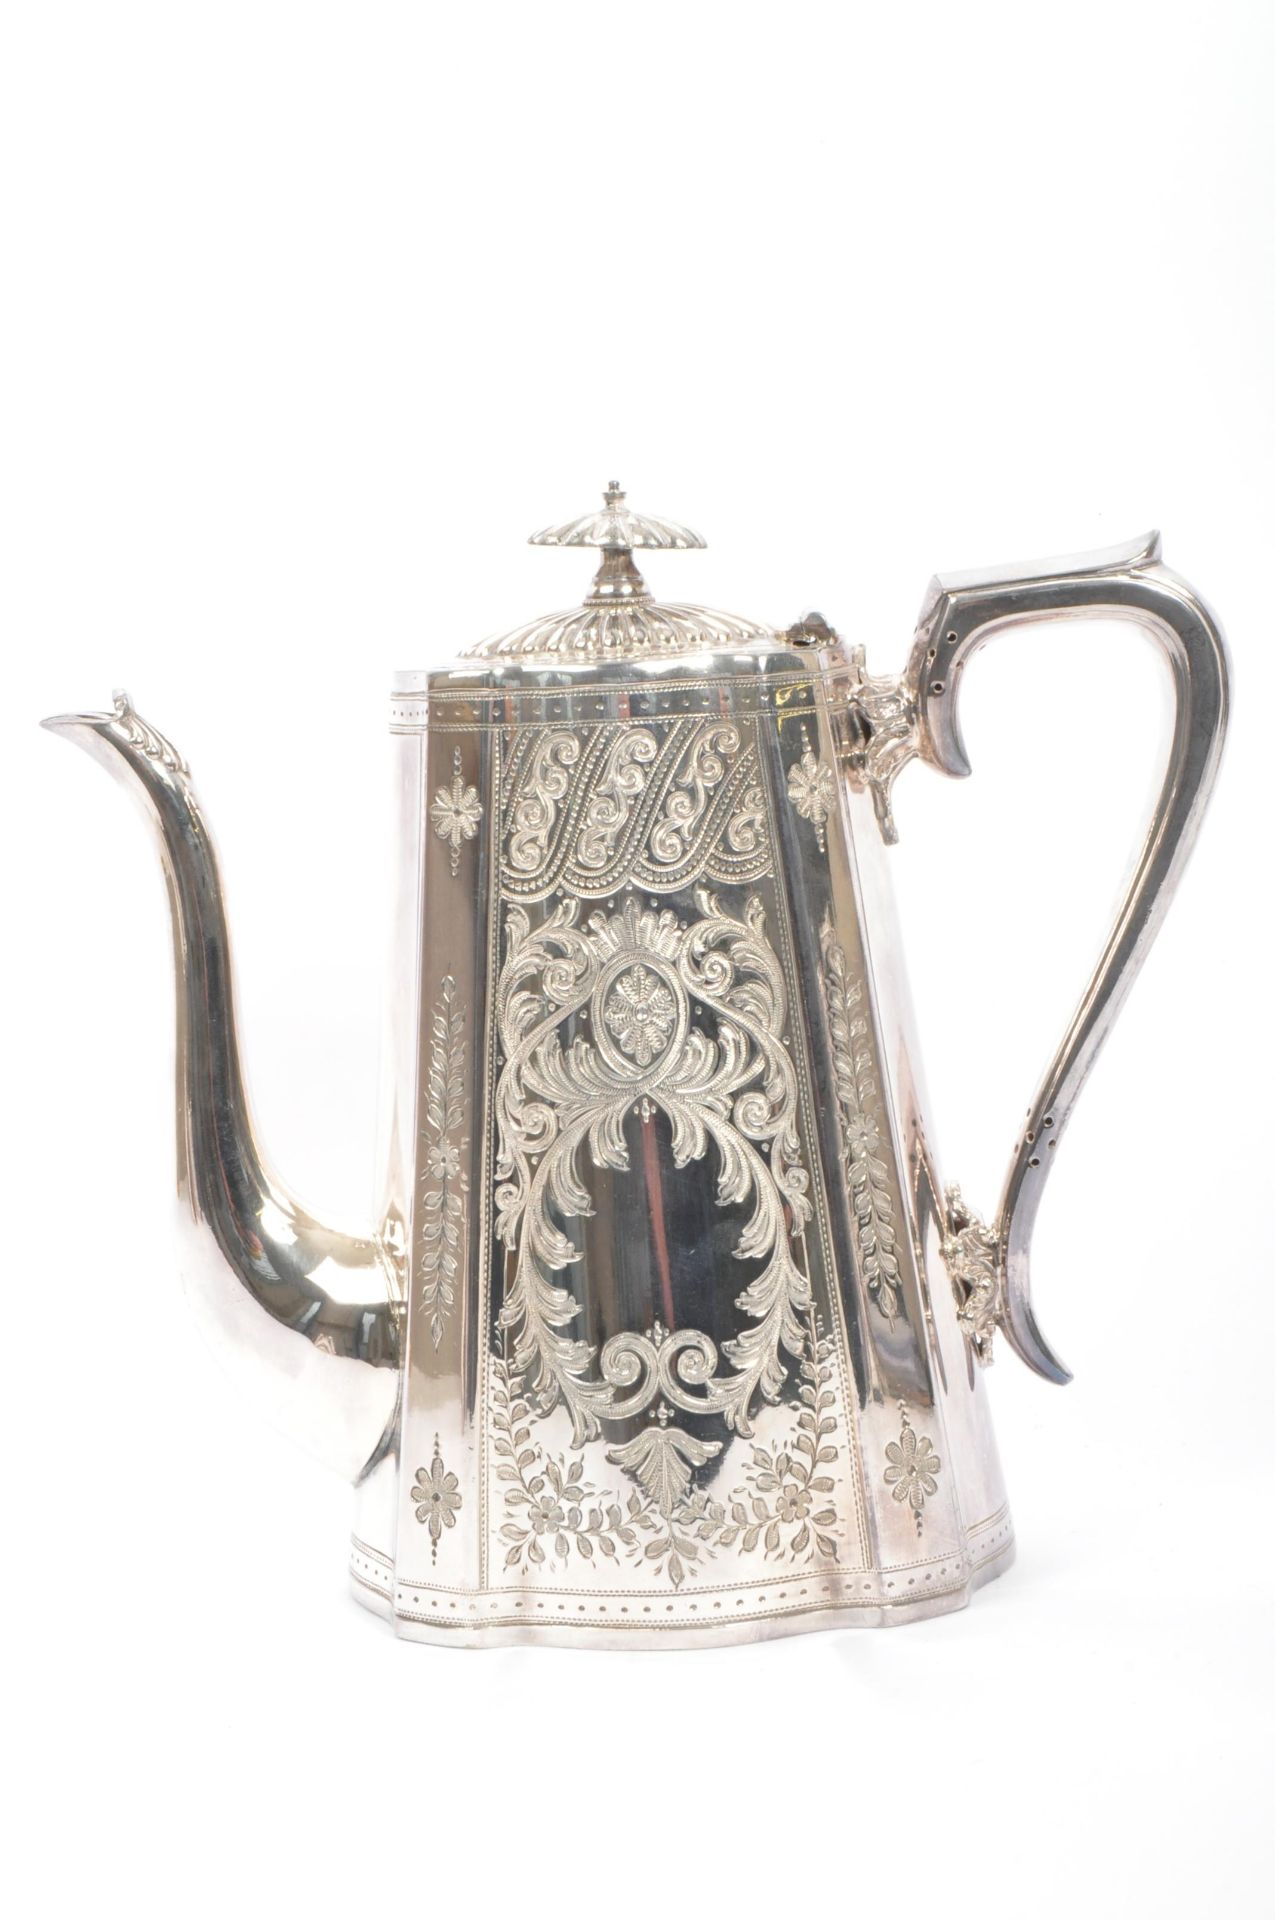 EARLY 20TH CENTURY WALKER & HALL, SHEFFIELD SILVER PLATED ITEMS - Image 4 of 7